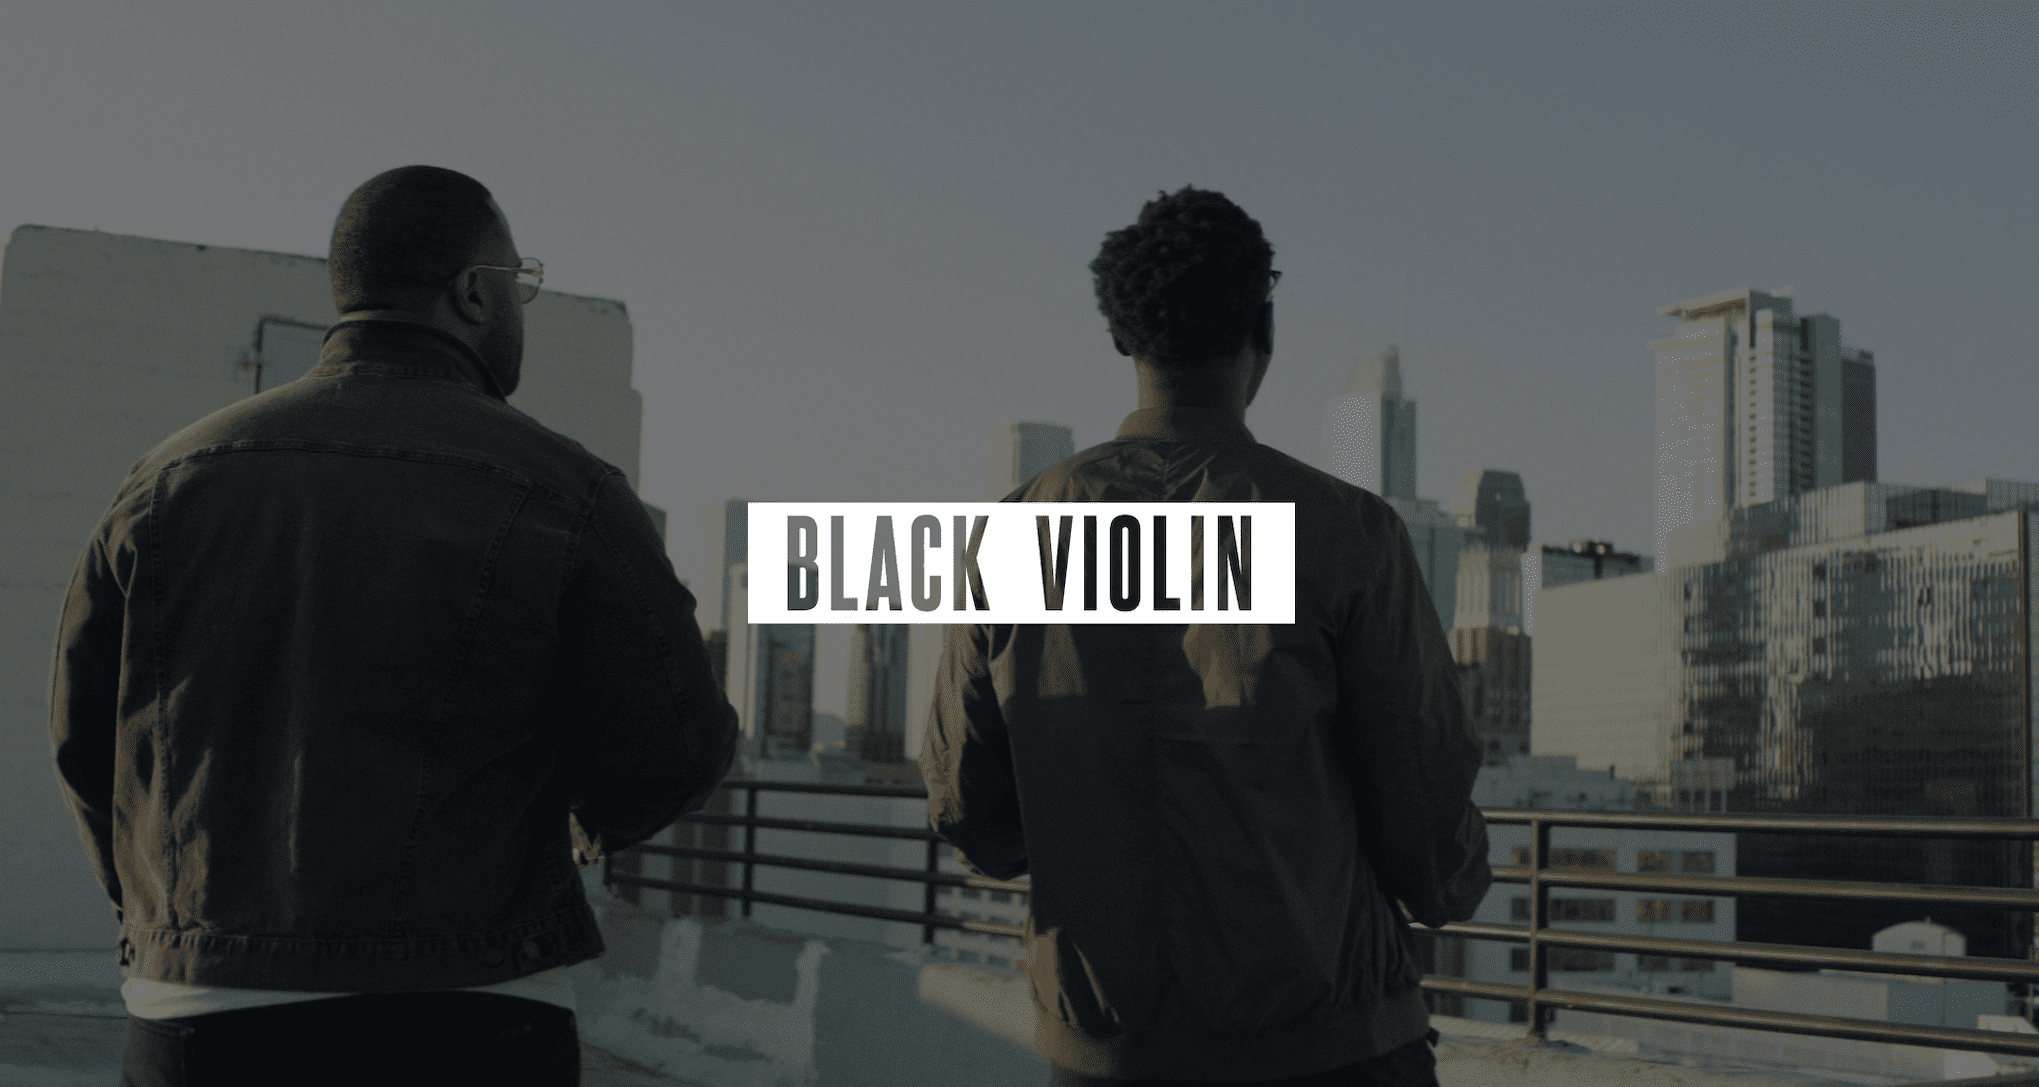 Audio Services by C&I Studios Video Production Services to Podcast Recording Studio Gray Black Violin logo on white against a dimmed background of two men standing on a concrete rooftop looking out over the city